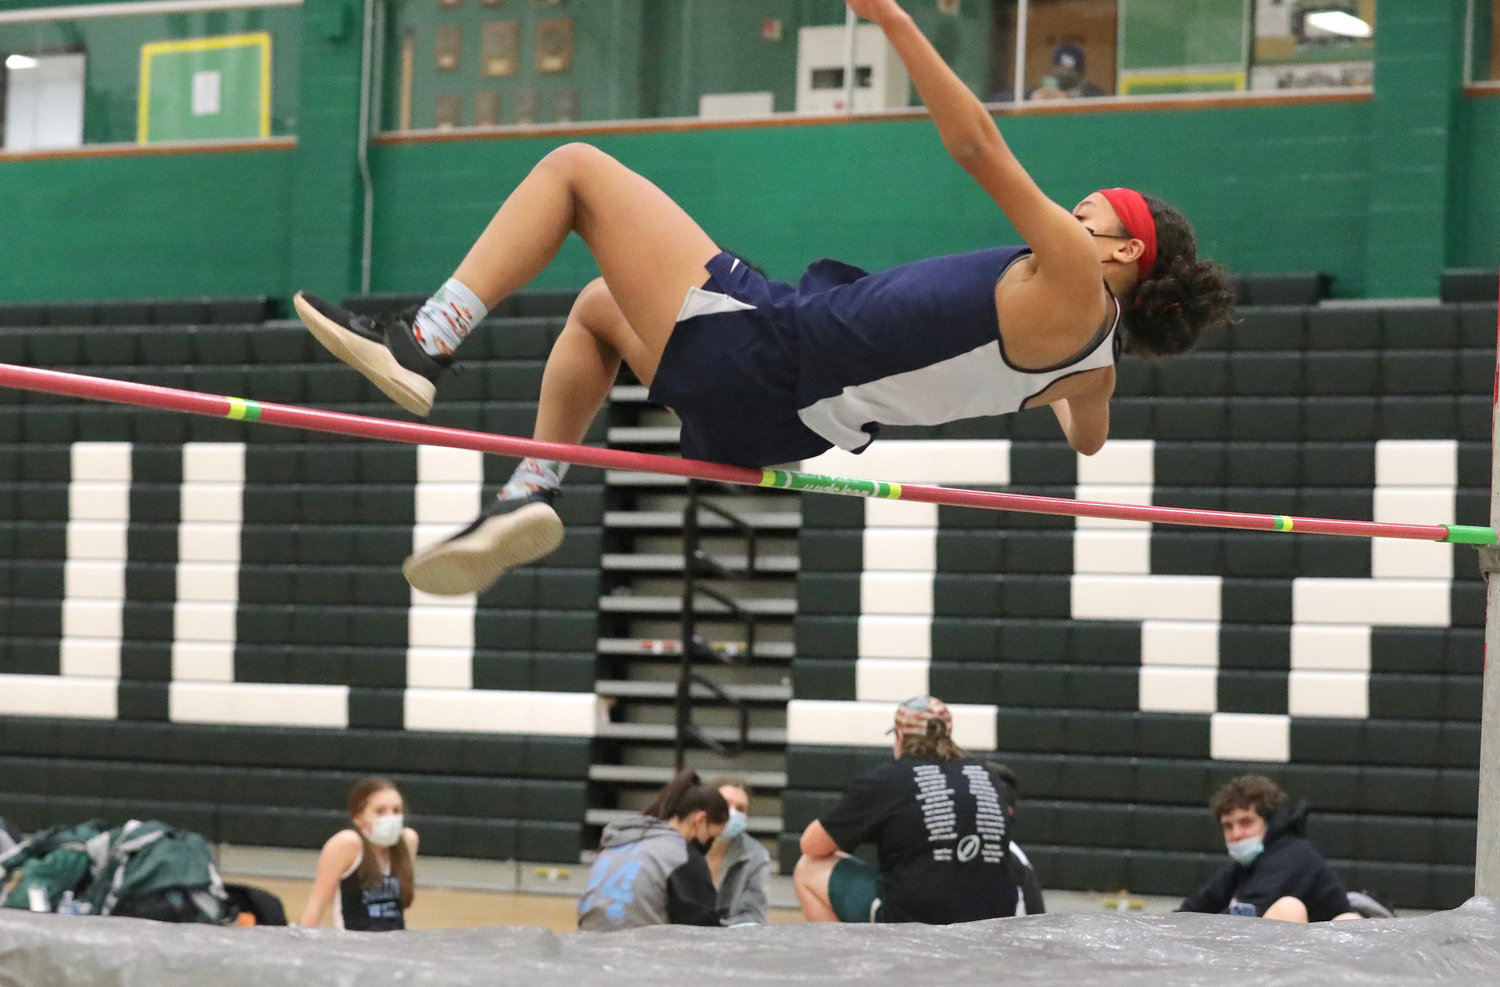 Tri-Valley’s Kendall McGregor showing her agility in clearing the high bar.